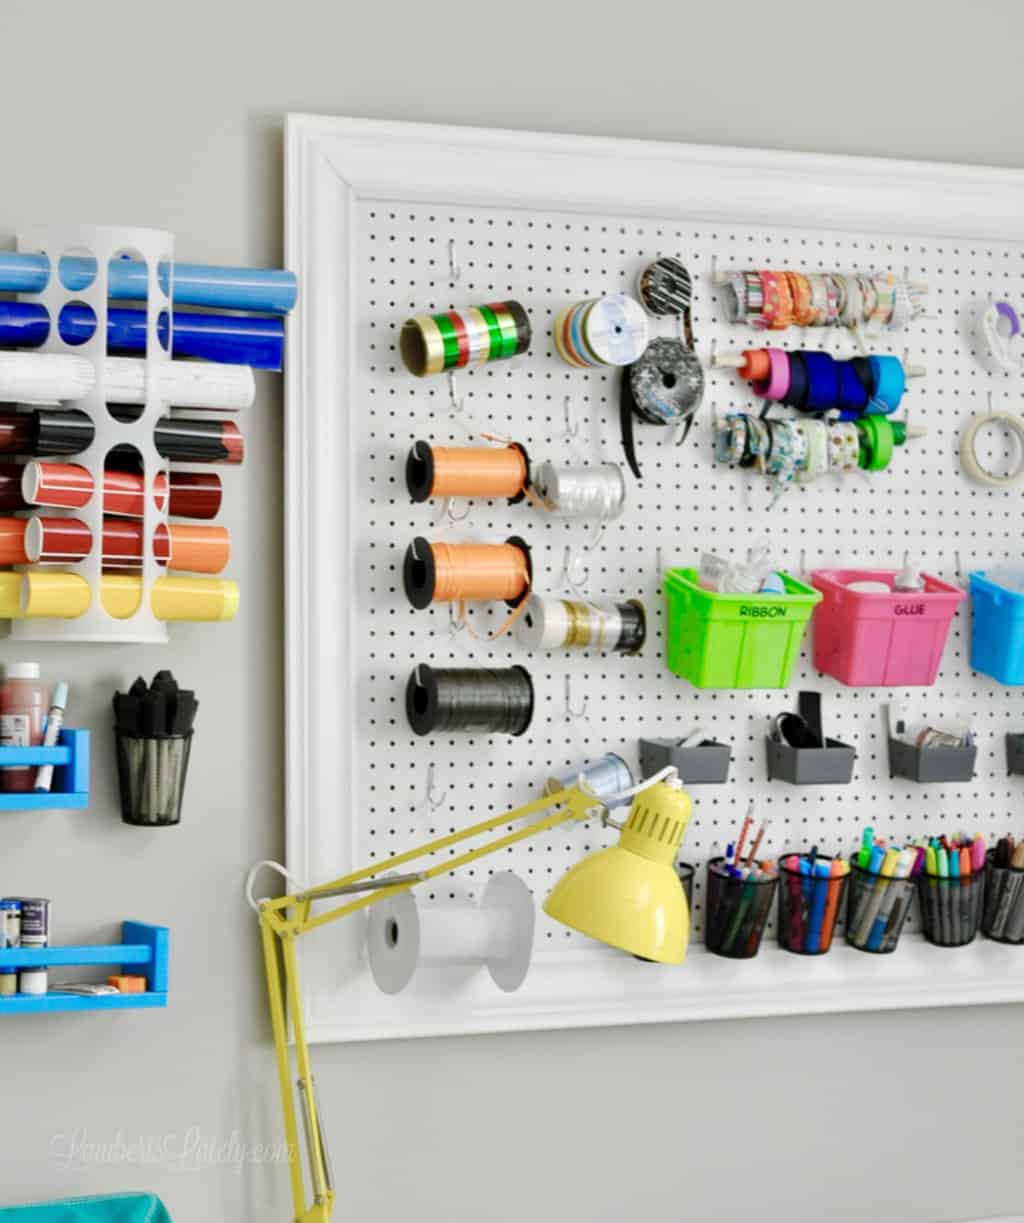 How to Build a DIY Pegboard For a Craft Room